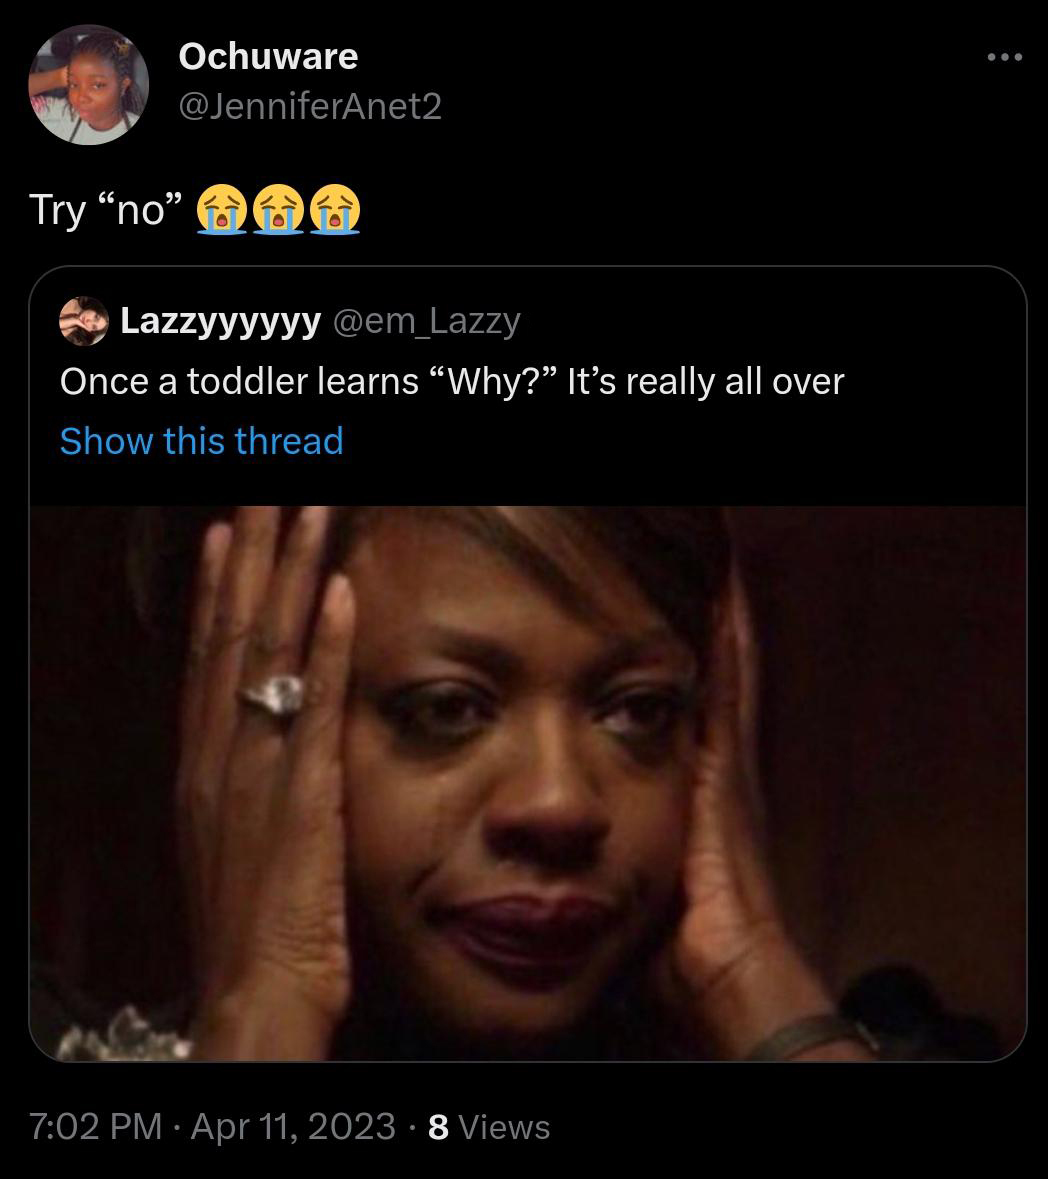 viola davis crying meme - Ochuware Try "no" Lazzyyyyyy Once a toddler learns Why?" It's really all over Show this thread 8 Views